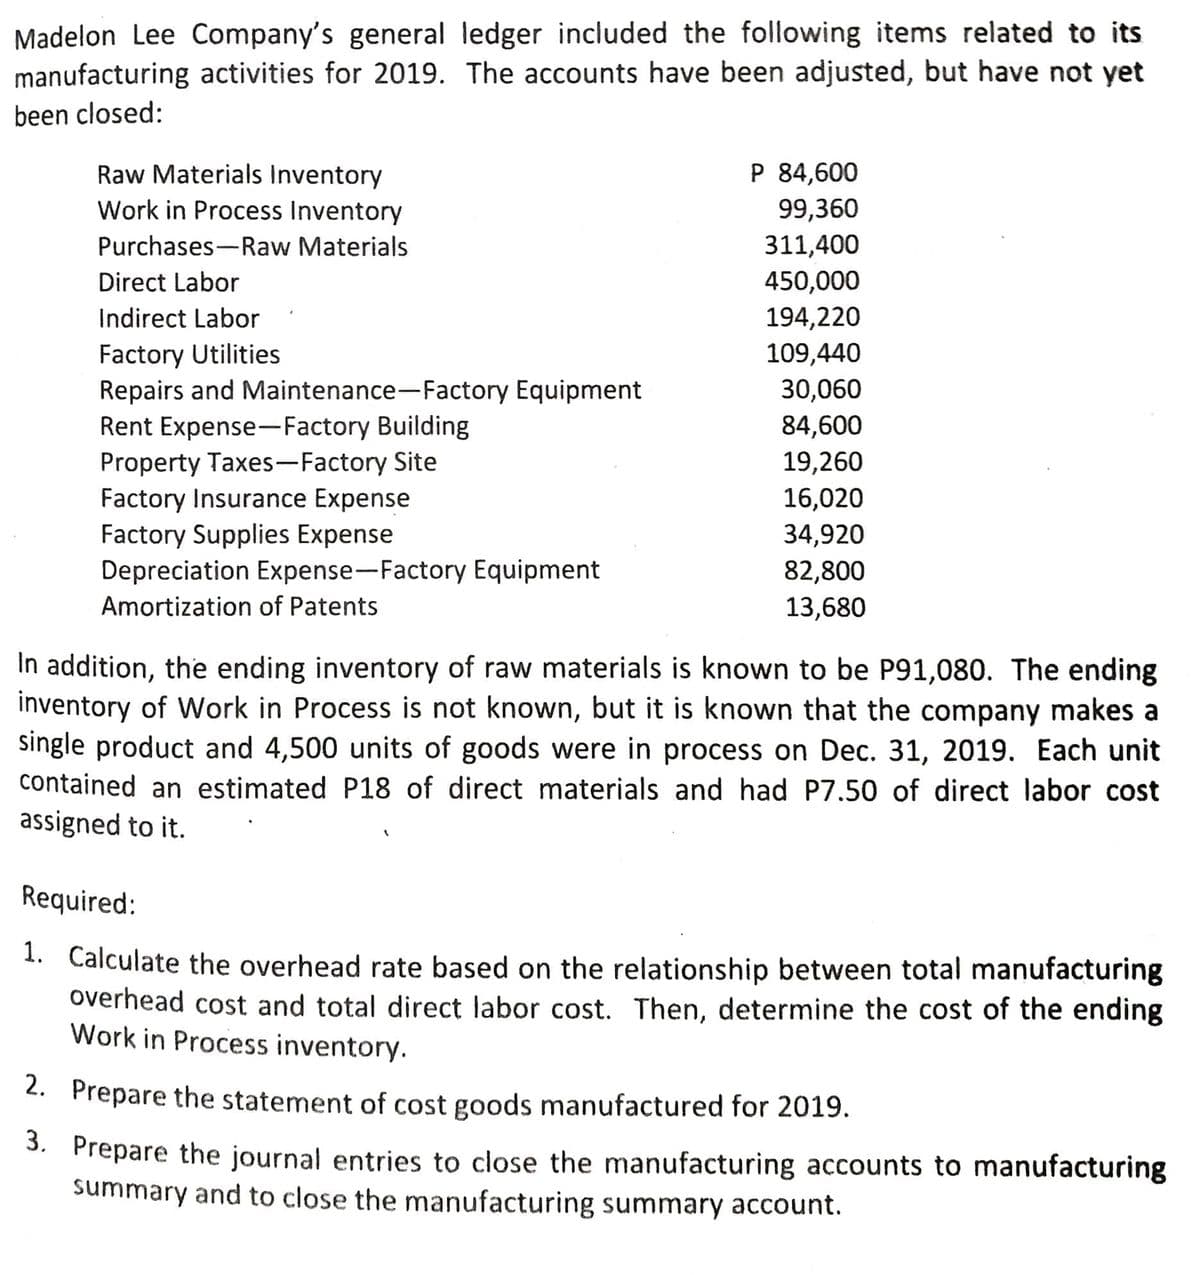 Madelon Lee Company's general ledger included the following items related to its
manufacturing activities for 2019. The accounts have been adjusted, but have not yet
been closed:
Raw Materials Inventory
P 84,600
Work in Process Inventory
99,360
Purchases-Raw Materials
311,400
Direct Labor
450,000
Indirect Labor
194,220
Factory Utilities
Repairs and Maintenance-Factory Equipment
Rent Expense-Factory Building
Property Taxes-Factory Site
Factory Insurance Expense
Factory Supplies Expense
Depreciation Expense-Factory Equipment
109,440
30,060
84,600
19,260
16,020
34,920
82,800
13,680
Amortization of Patents
In addition, the ending inventory of raw materials is known to be P91,080. The ending
inventory of Work in Process is not known, but it is known that the company makes a
single product and 4,500 units of goods were in process on Dec. 31, 2019. Each unit
contained an estimated P18 of direct materials and had P7.50 of direct labor cost
assigned to it.
Required:
1. Calculate the overhead rate based on the relationship between total manufacturing
overhead cost and total direct labor cost. Then, determine the cost of the ending
Work in Process inventory.
2. Prepare the statement of cost goods manufactured for 2019.
3. Prepare the journal entries to close the manufacturing accounts to manufacturing
summary and to close the manufacturing summary account.
